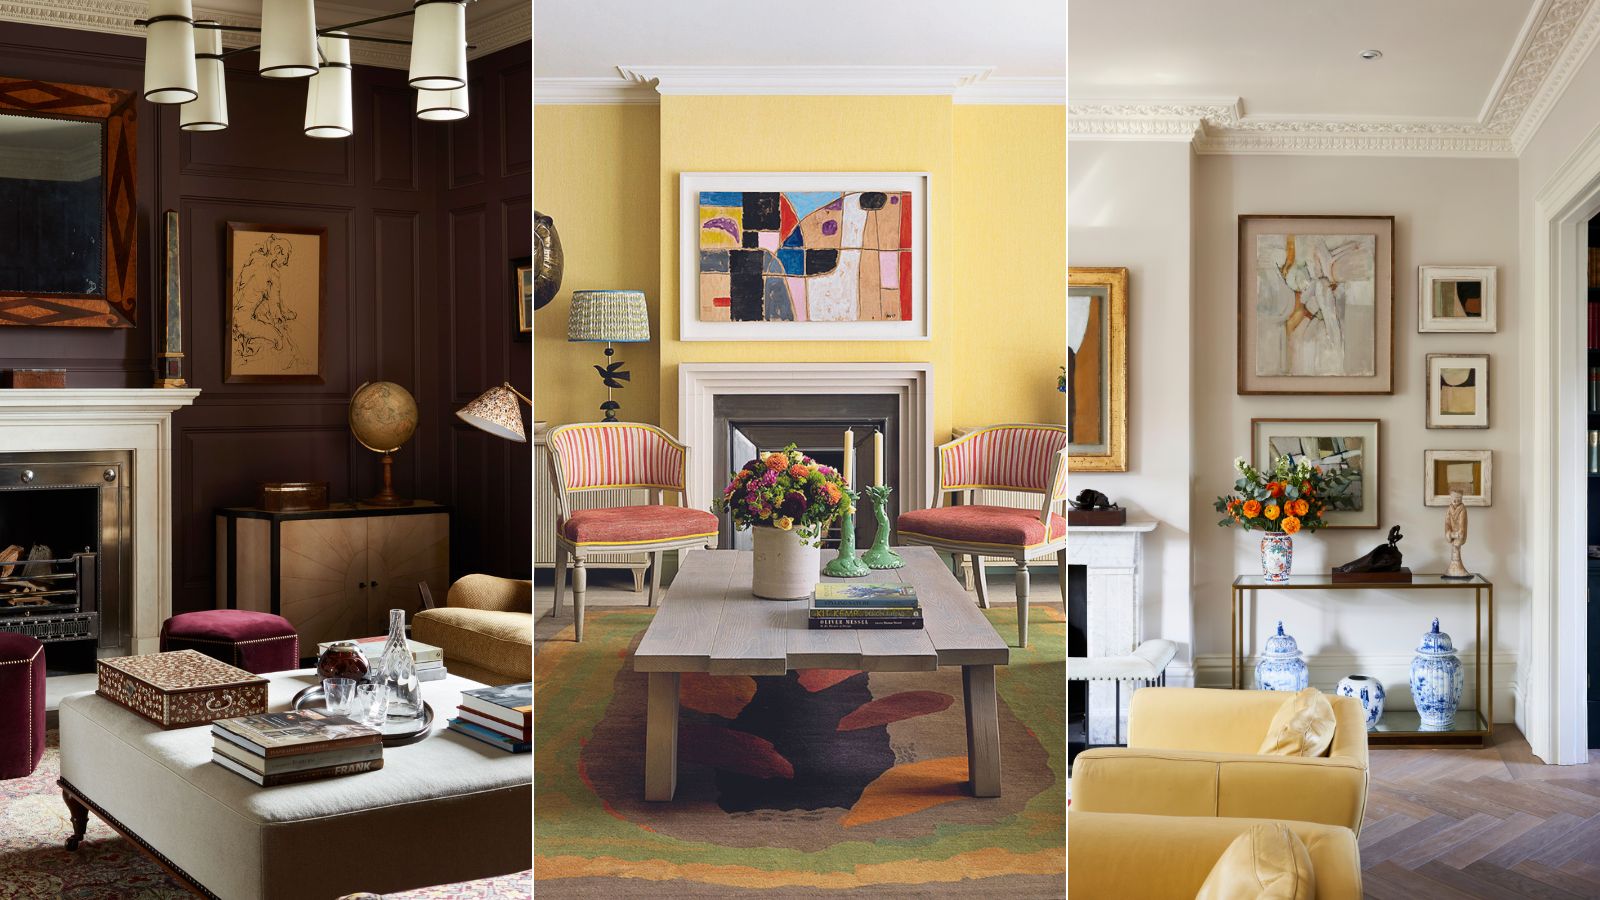 Warm color schemes – how and when to use color for cozy spaces according to design experts